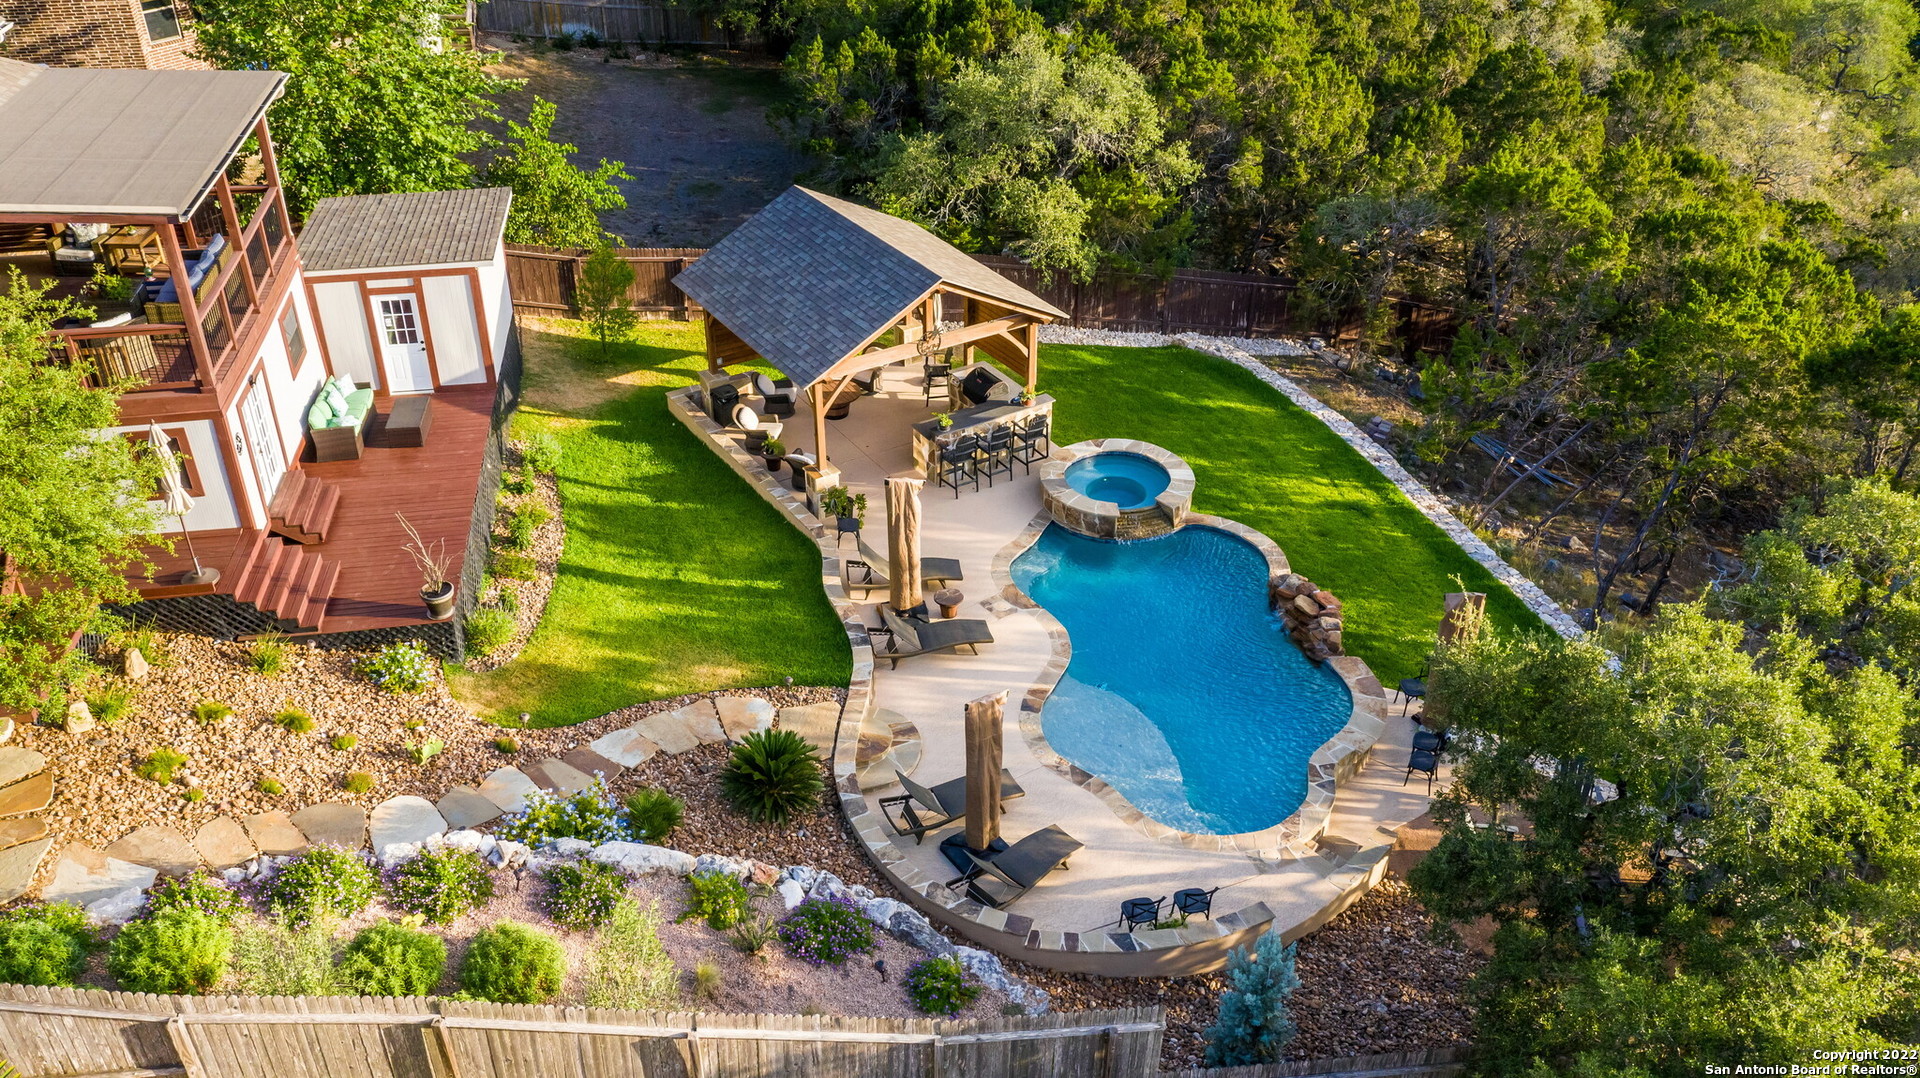 MULTIPLE OFFER situation!  Offers due Sunday 6/26 at 6pm.  This rare combination of gorgeous home & incredible outdoor space, in desirable Mountain Lodge, is a MUST SEE! It's impossible to ignore the pride of ownership in this neighborhood gem.  With 5 bedrooms (master AND 1 secondary down!), 4 full baths, office, game room & media rooms you have plenty of space to work from home, watch movies, play games, host guests, have parties... did someone say pool party?!  Prepare for your jaw to drop as you open the (custom, newly installed) plantation shutters to look outside and/or walk out onto the back patio and into your backyard oasis! If you're looking for the "wow factor", you have found it!  Outside you will find thoughtfully designed landscaping, pool with spa, pavilion with outdoor kitchen, extended patio (also plumbed for a kitchen), a shed (storage!) and wood shop.  Come see for yourself - you'll be glad you did!  Not convinced? check out the video https://youtu.be/6FIR-1HbZ3M